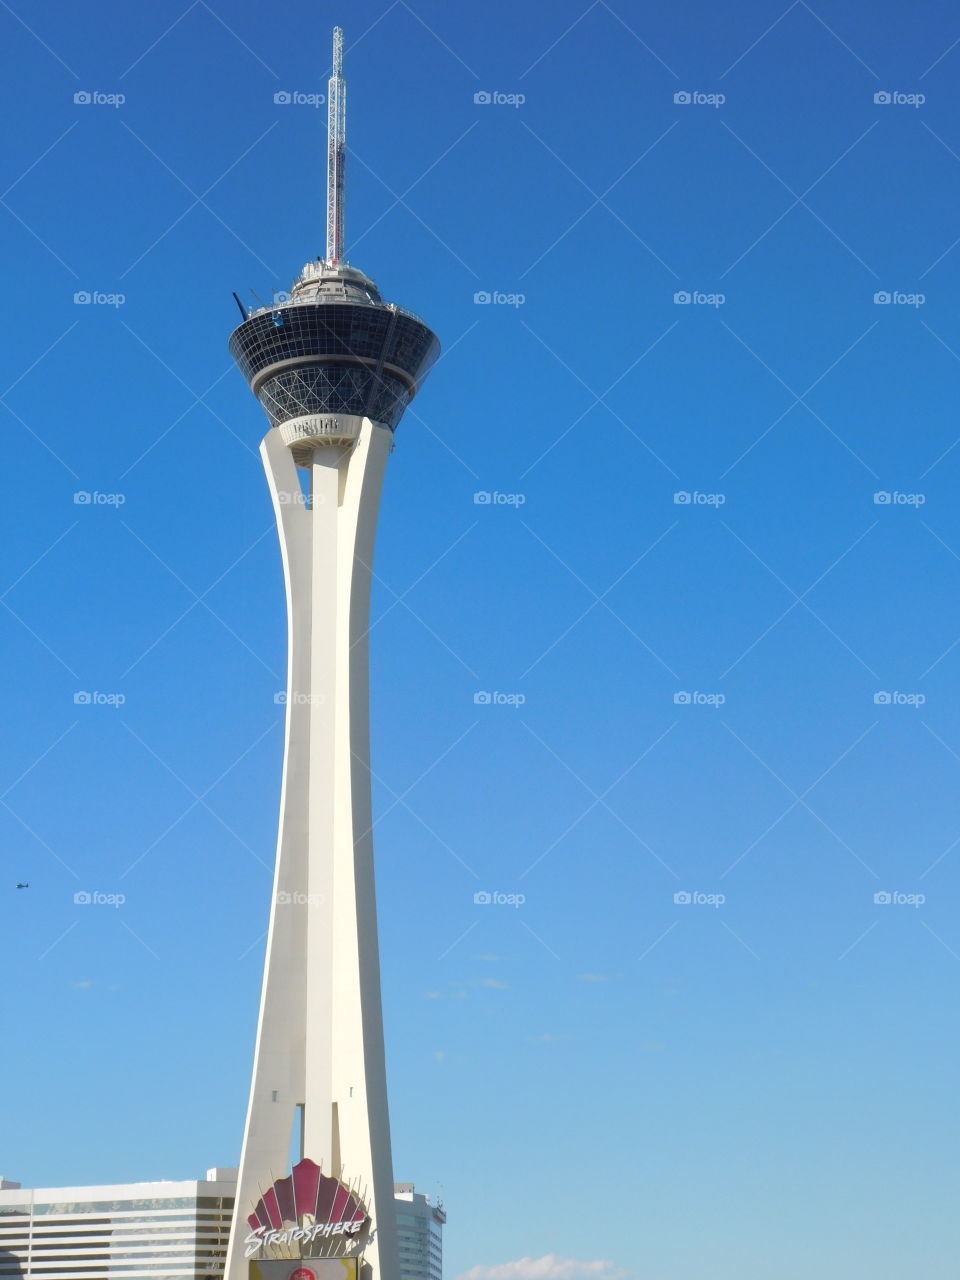 The stratosphere and no cloud in sight 